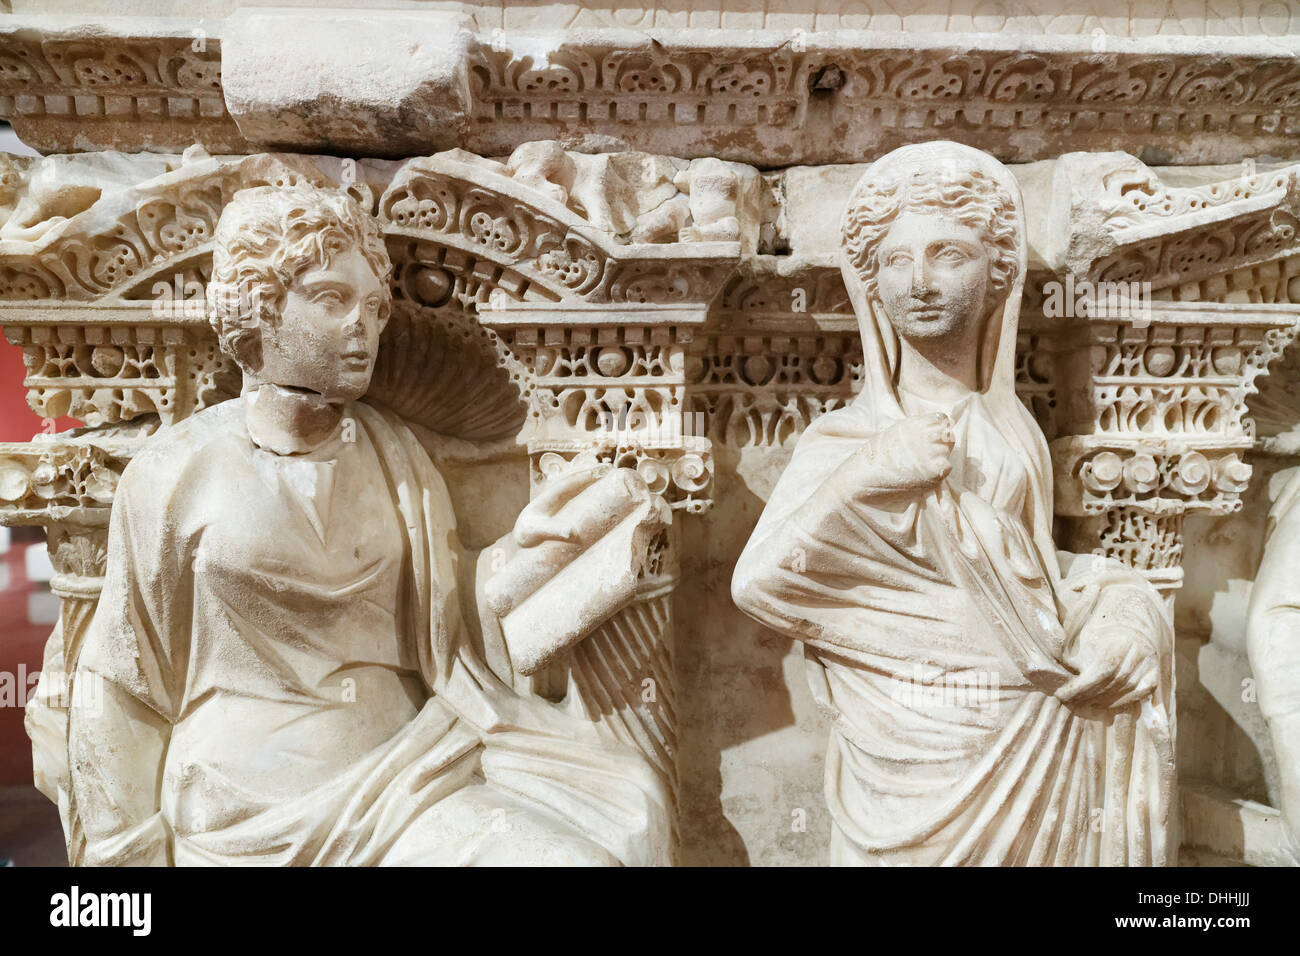 Archaeological Museum, marble frieze on the sarcophagus of Domitias Julianus and Domita Philiska from Perge, 2nd century AD Stock Photo